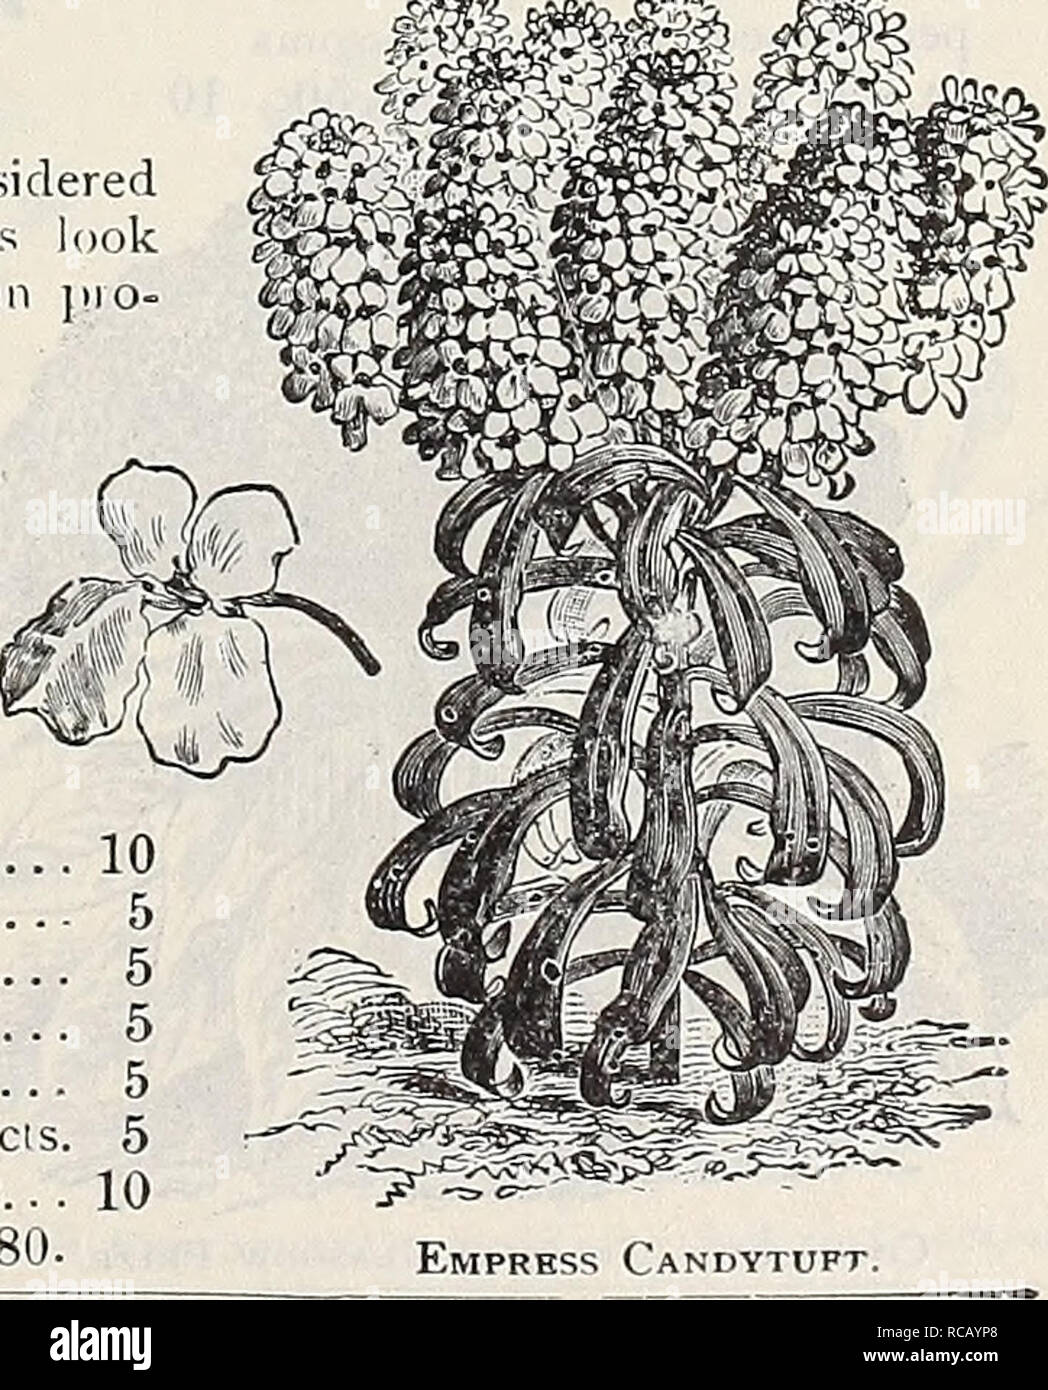 . Dreer's garden book : 1906. Seeds Catalogs; Nursery stock Catalogs; Gardening Equipment and supplies Catalogs; Flowers Seeds Catalogs; Vegetables Seeds Catalogs; Fruit Seeds Catalogs. â ^^^^t^y^iii^ Campanula Persicifolia Grandiflora. V CANDYTUFT. Campanula Media Calycanihema. (Cup and Saucer Canterbury Bells.) Canterbury Bells. V*^ (Caiii})anula Media.) Calycanthema [Cup and Saucer Canlerbiny Bells). This is unques- tionably the finest type of this old- fnshioned and much prized garden plant. The increasing demand has induced us to oft'er it in separate colors as well as in mixture, viz.: P Stock Photo